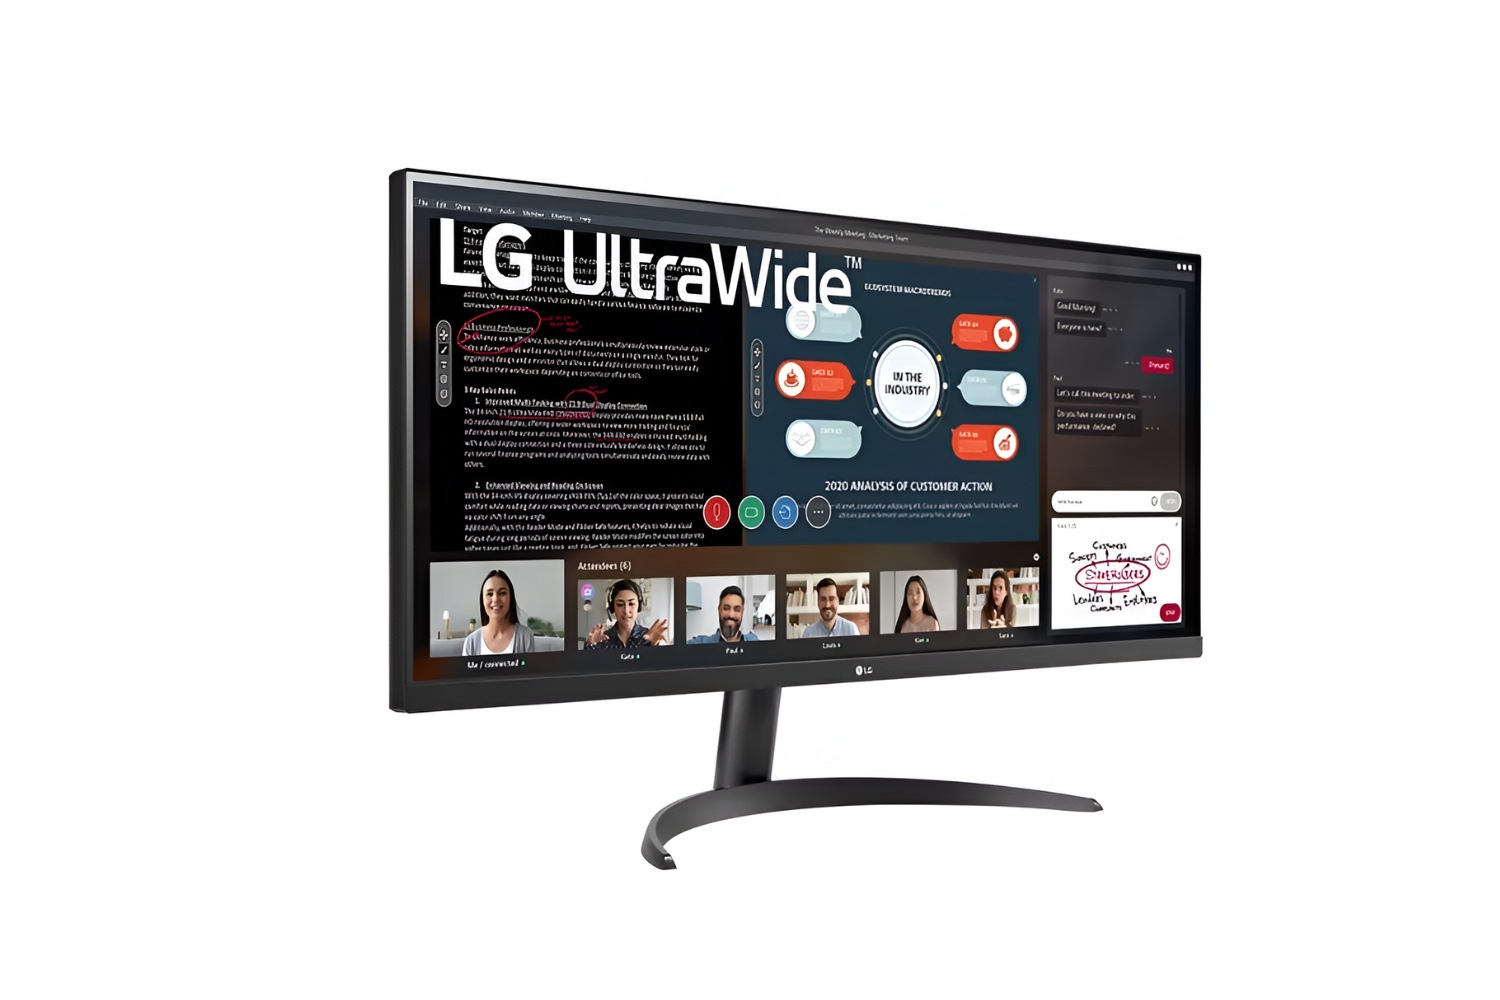 How To Download The Drivers For An LG Ultrawide Monitor